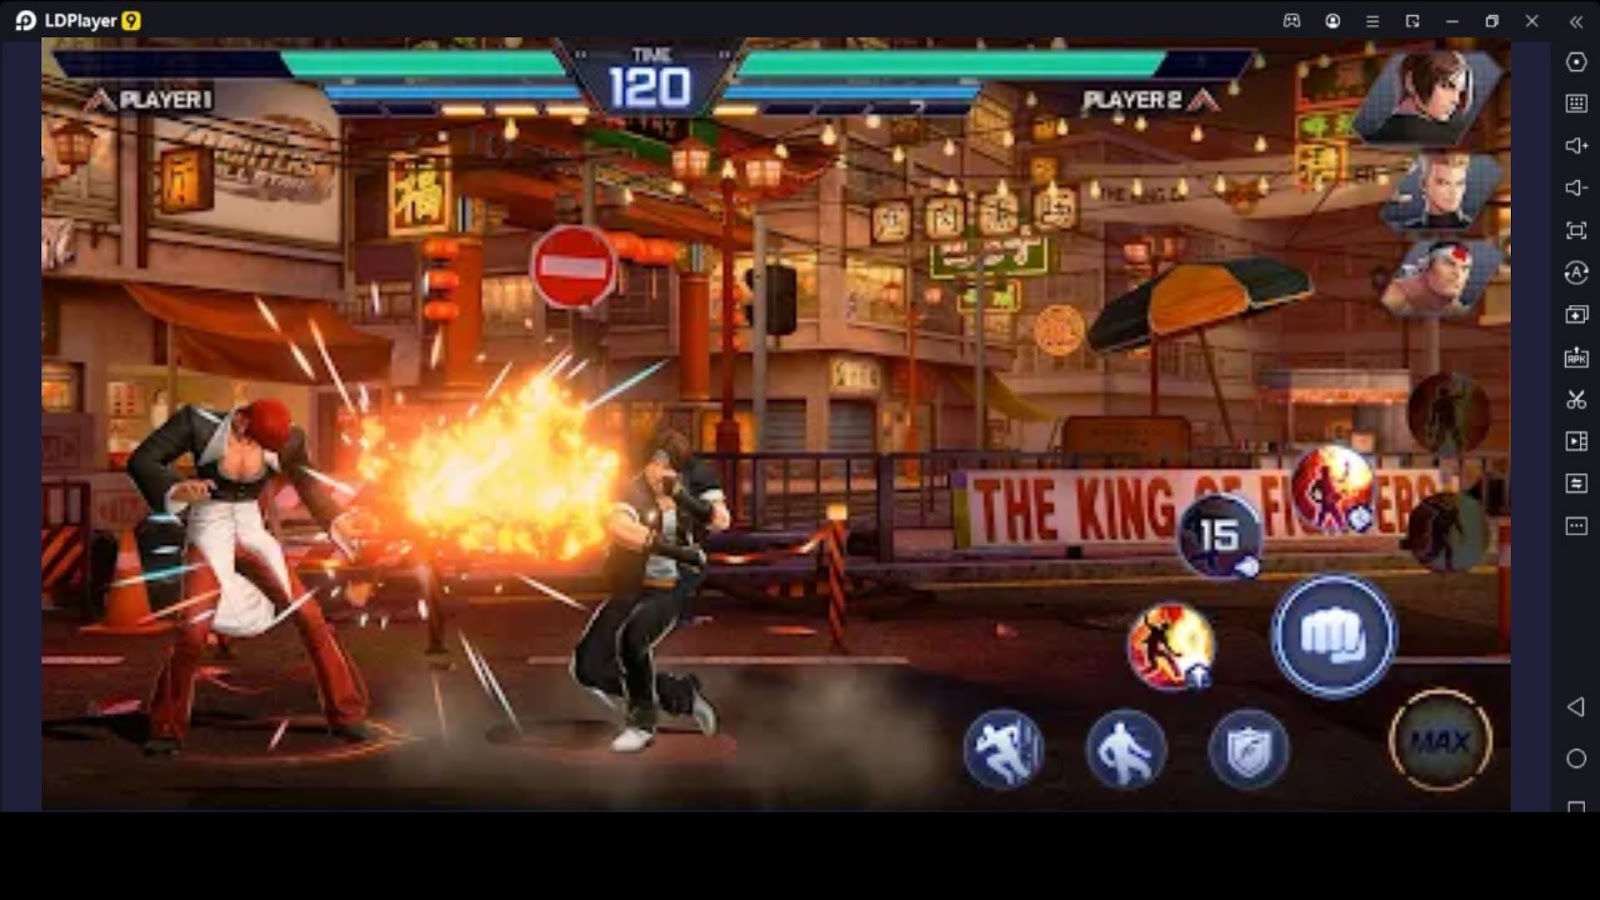 Download THE KING OF FIGHTERS '97 on PC (Emulator) - LDPlayer